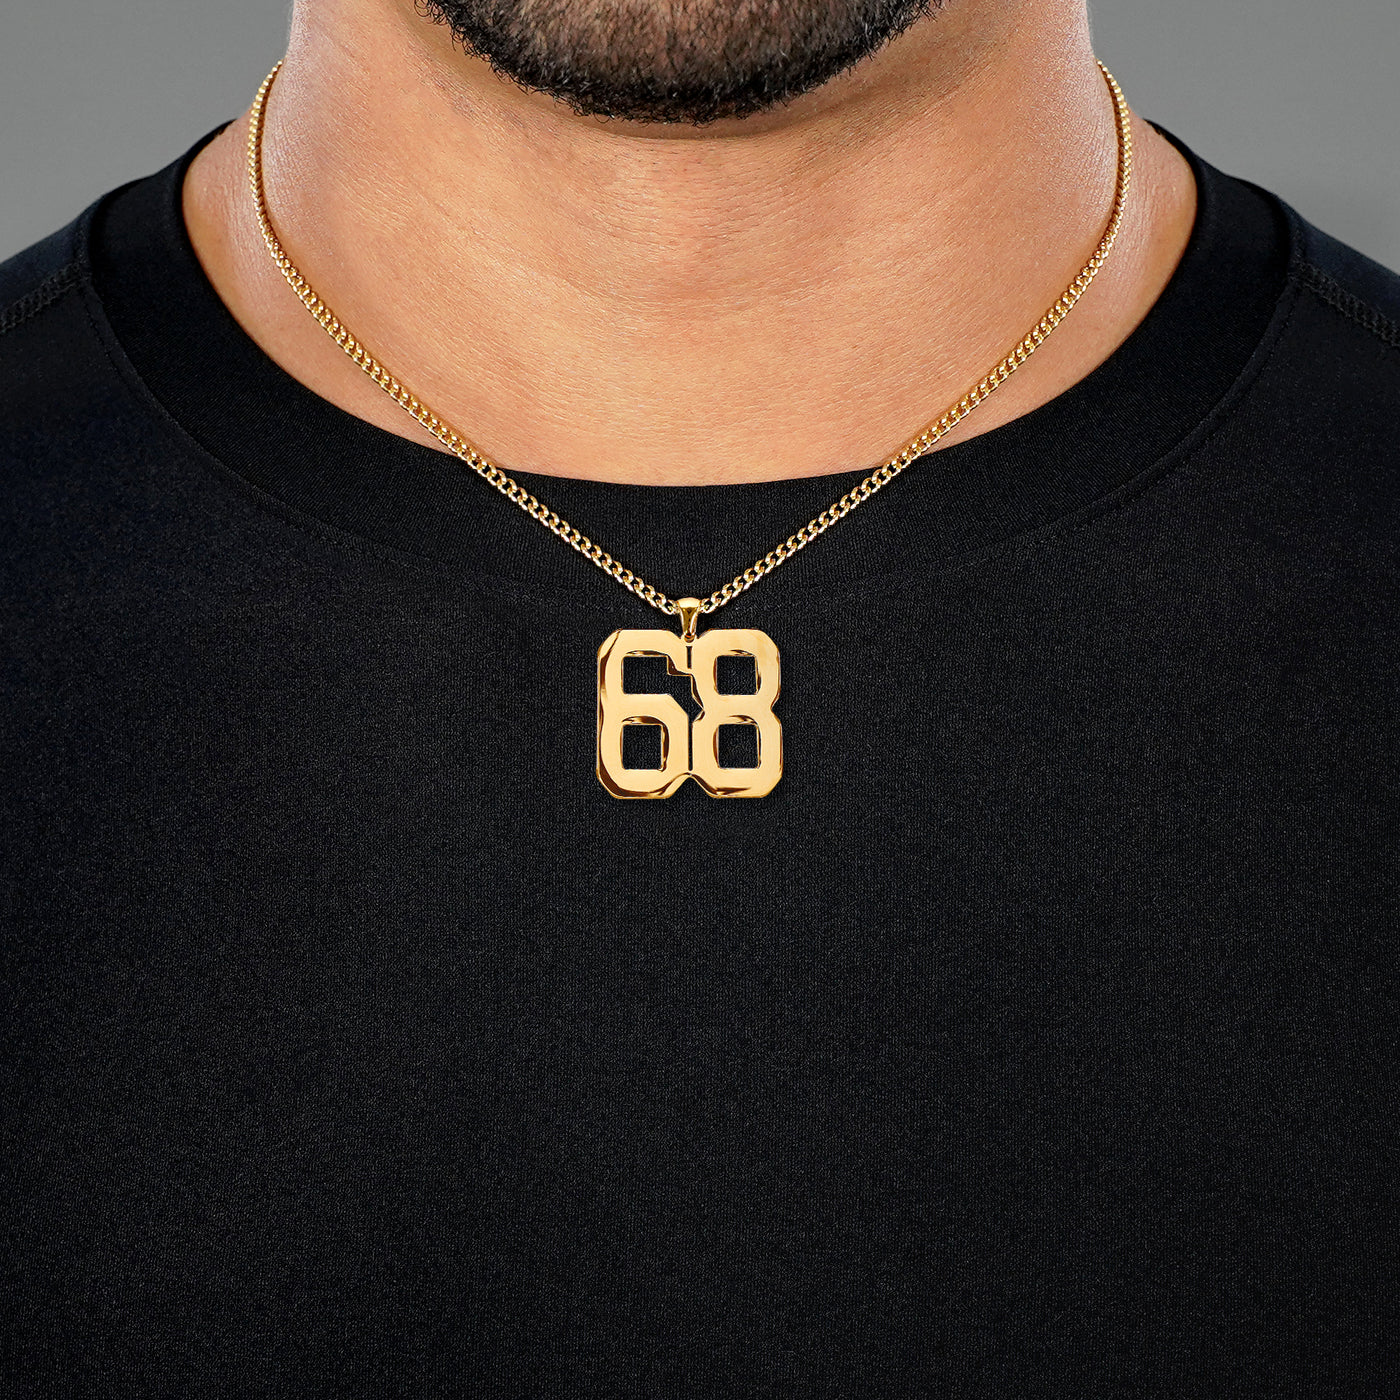 68 Number Pendant with Chain Necklace - Gold Plated Stainless Steel